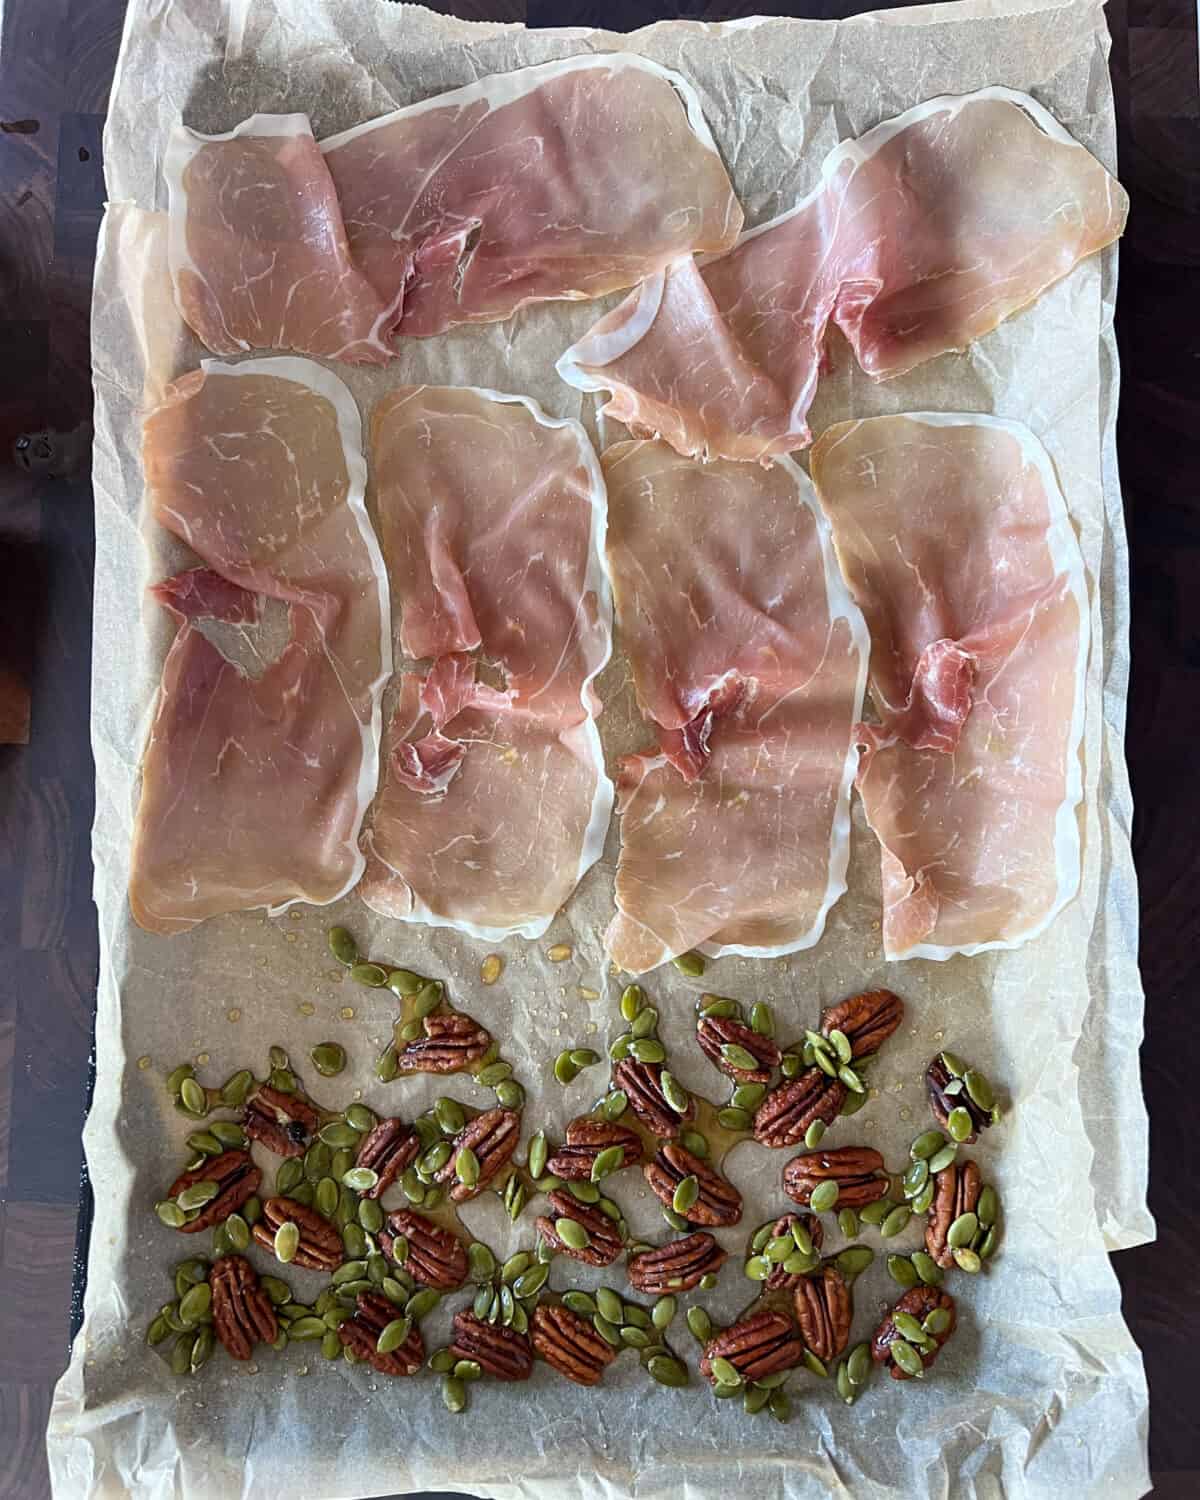 A sheet pan lined with parchment paper with prosciutto, nuts and seeds laid out to be roasted.